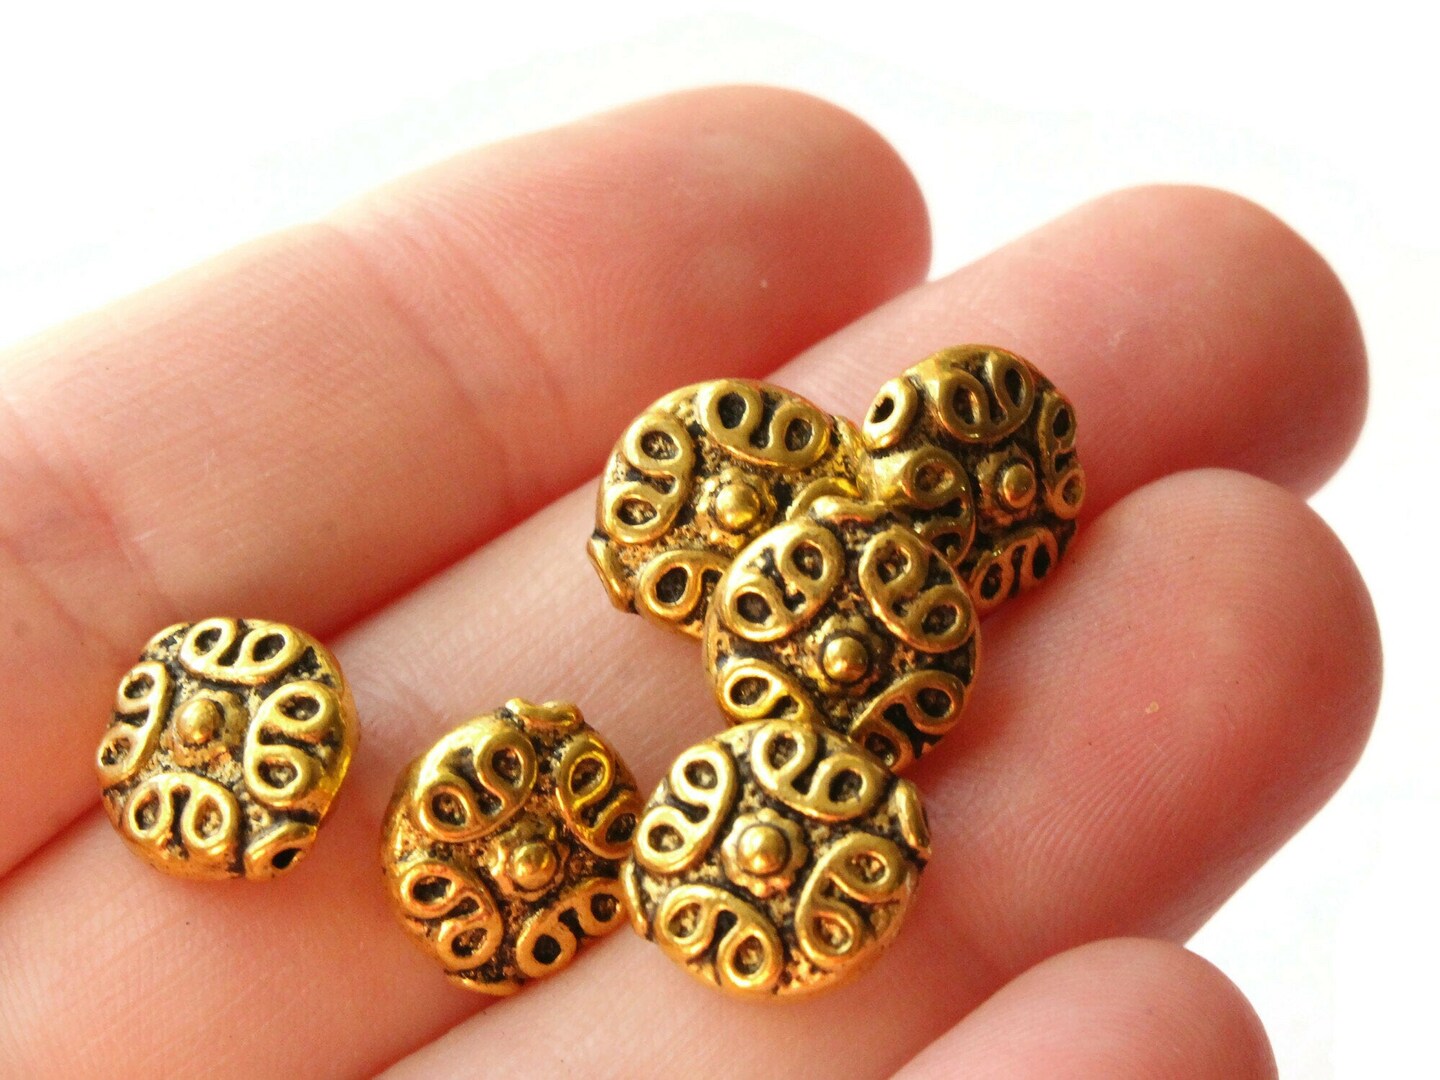 6 12mm Antique Golden Patterned Coin Beads with Rim